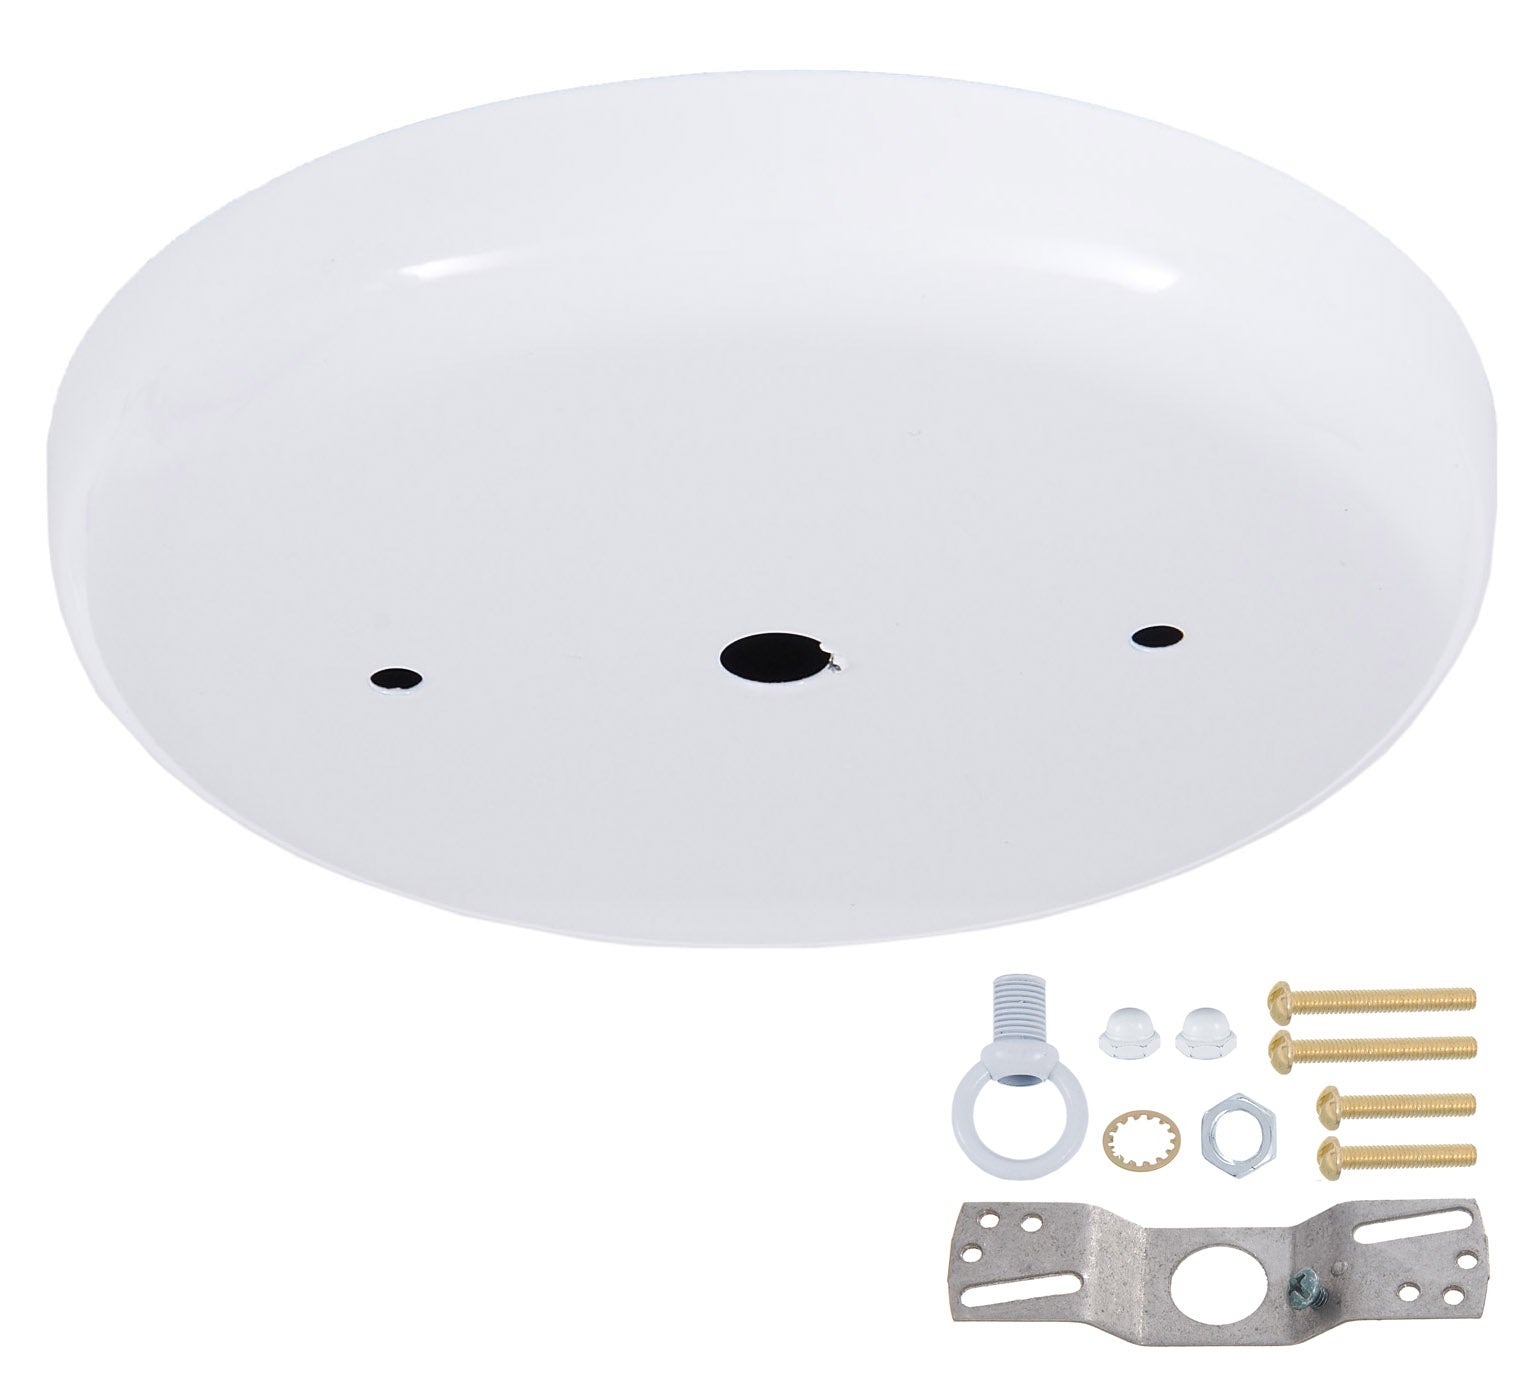 5 1/4 Inch Steel Canopy Kit with White Finish